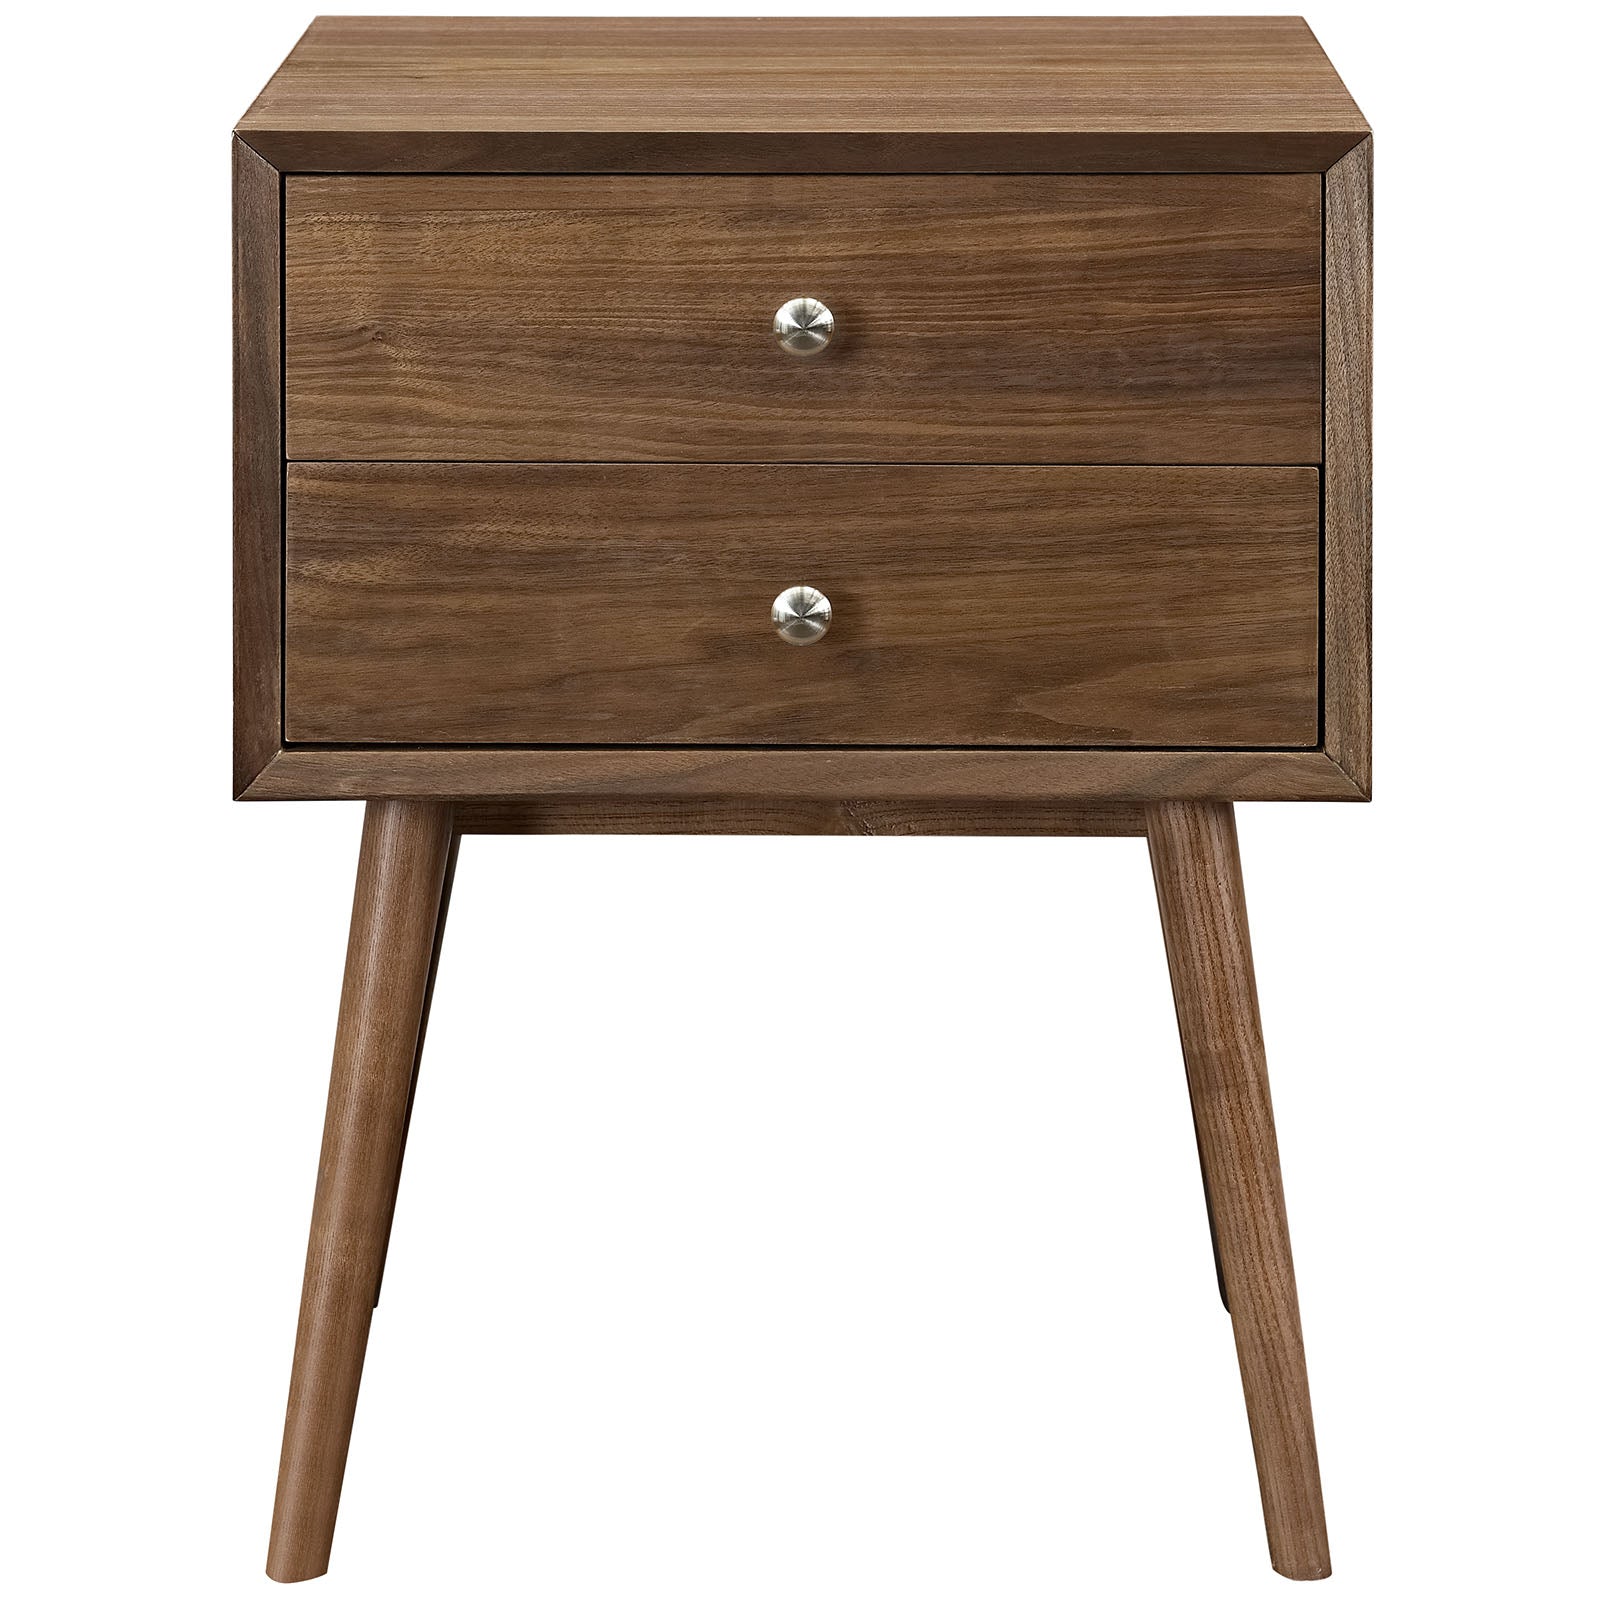 Modway Nightstands & Side Tables - Dispatch Nightstand Walnut